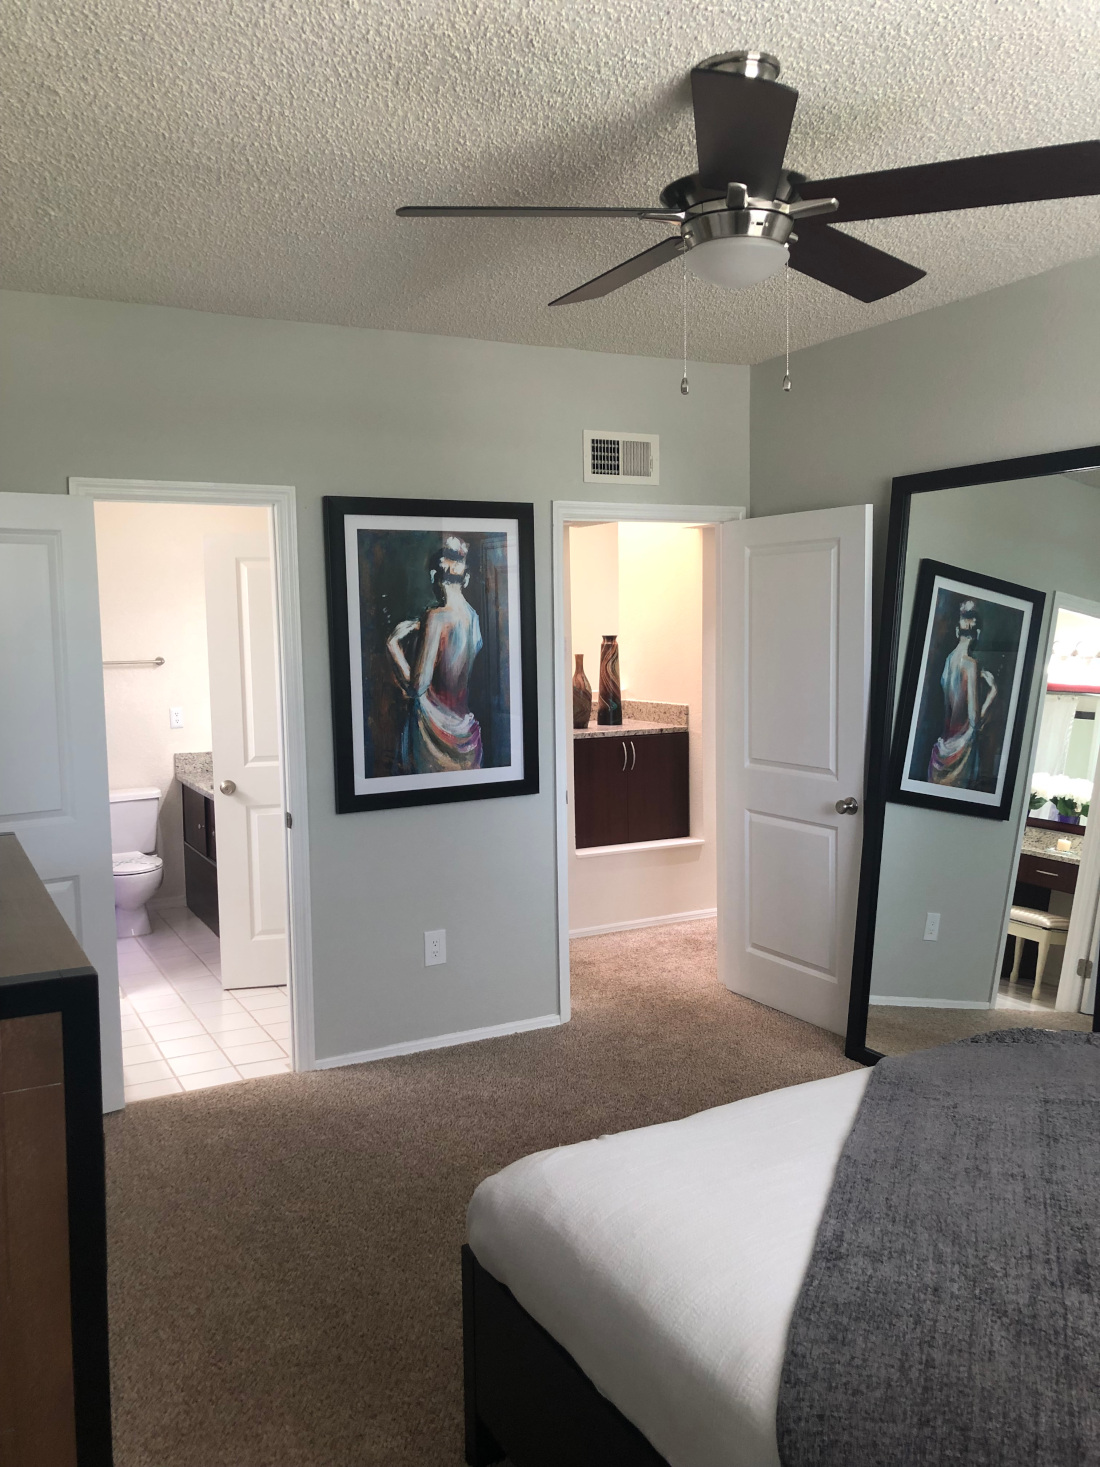 Bedroom, comfort room and a body mirror at Waterford Point Apartments in Miami, Florida